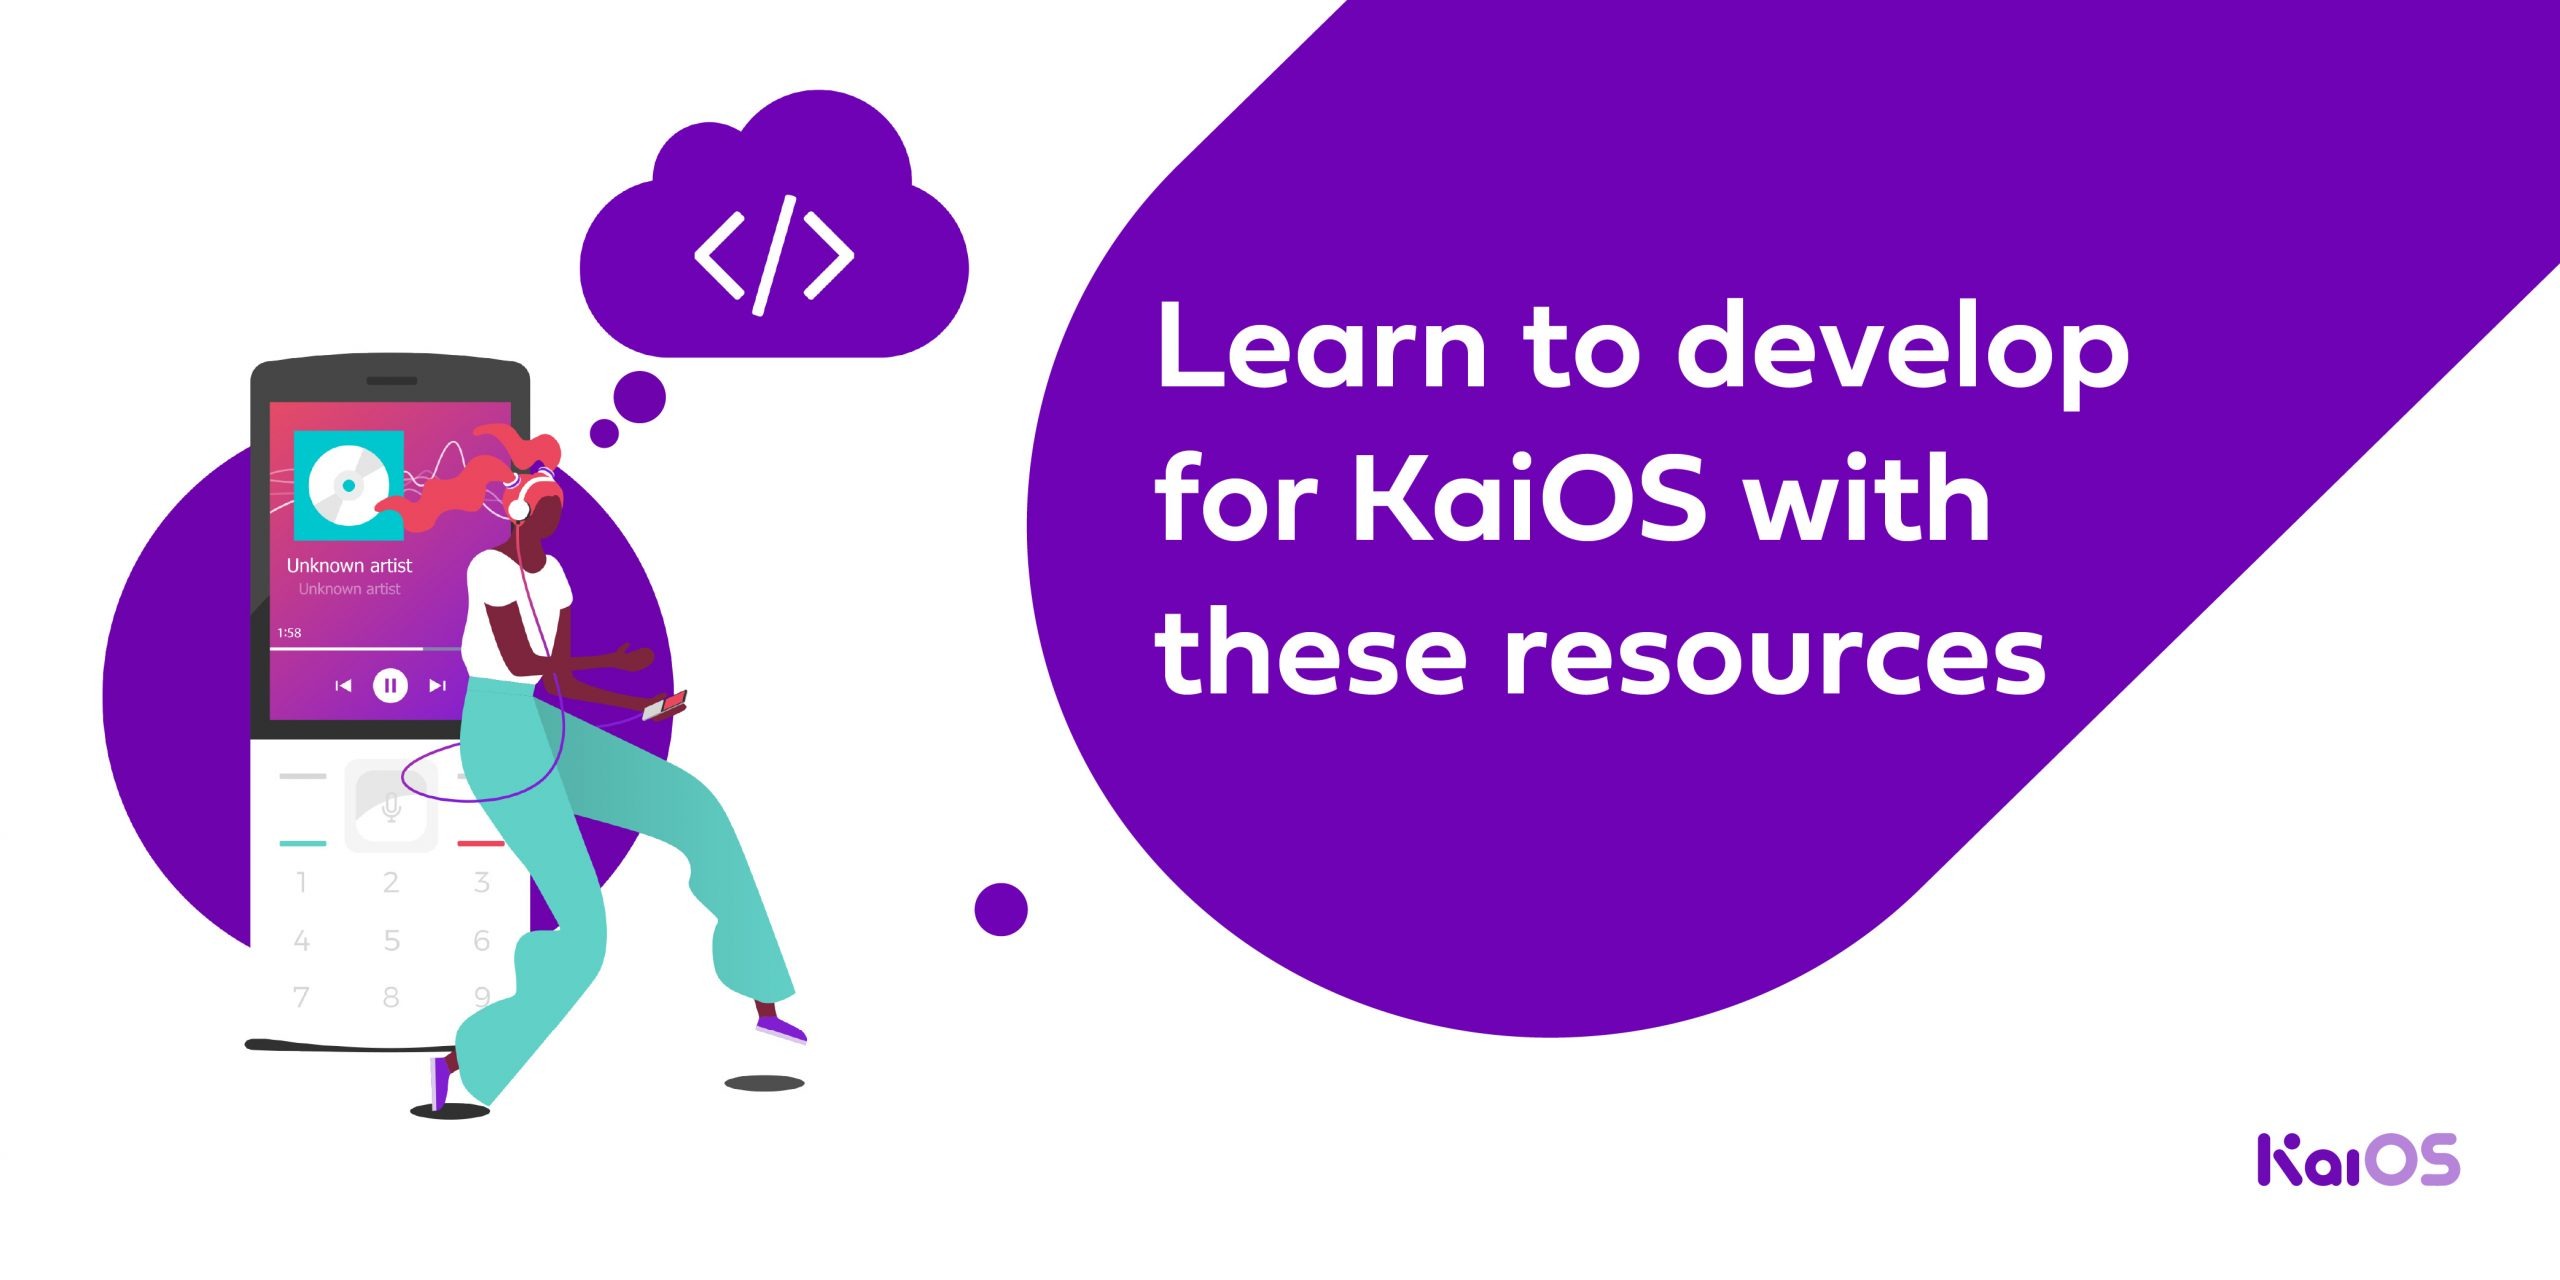 Learn to develop for the KaiOS operating system with these resources